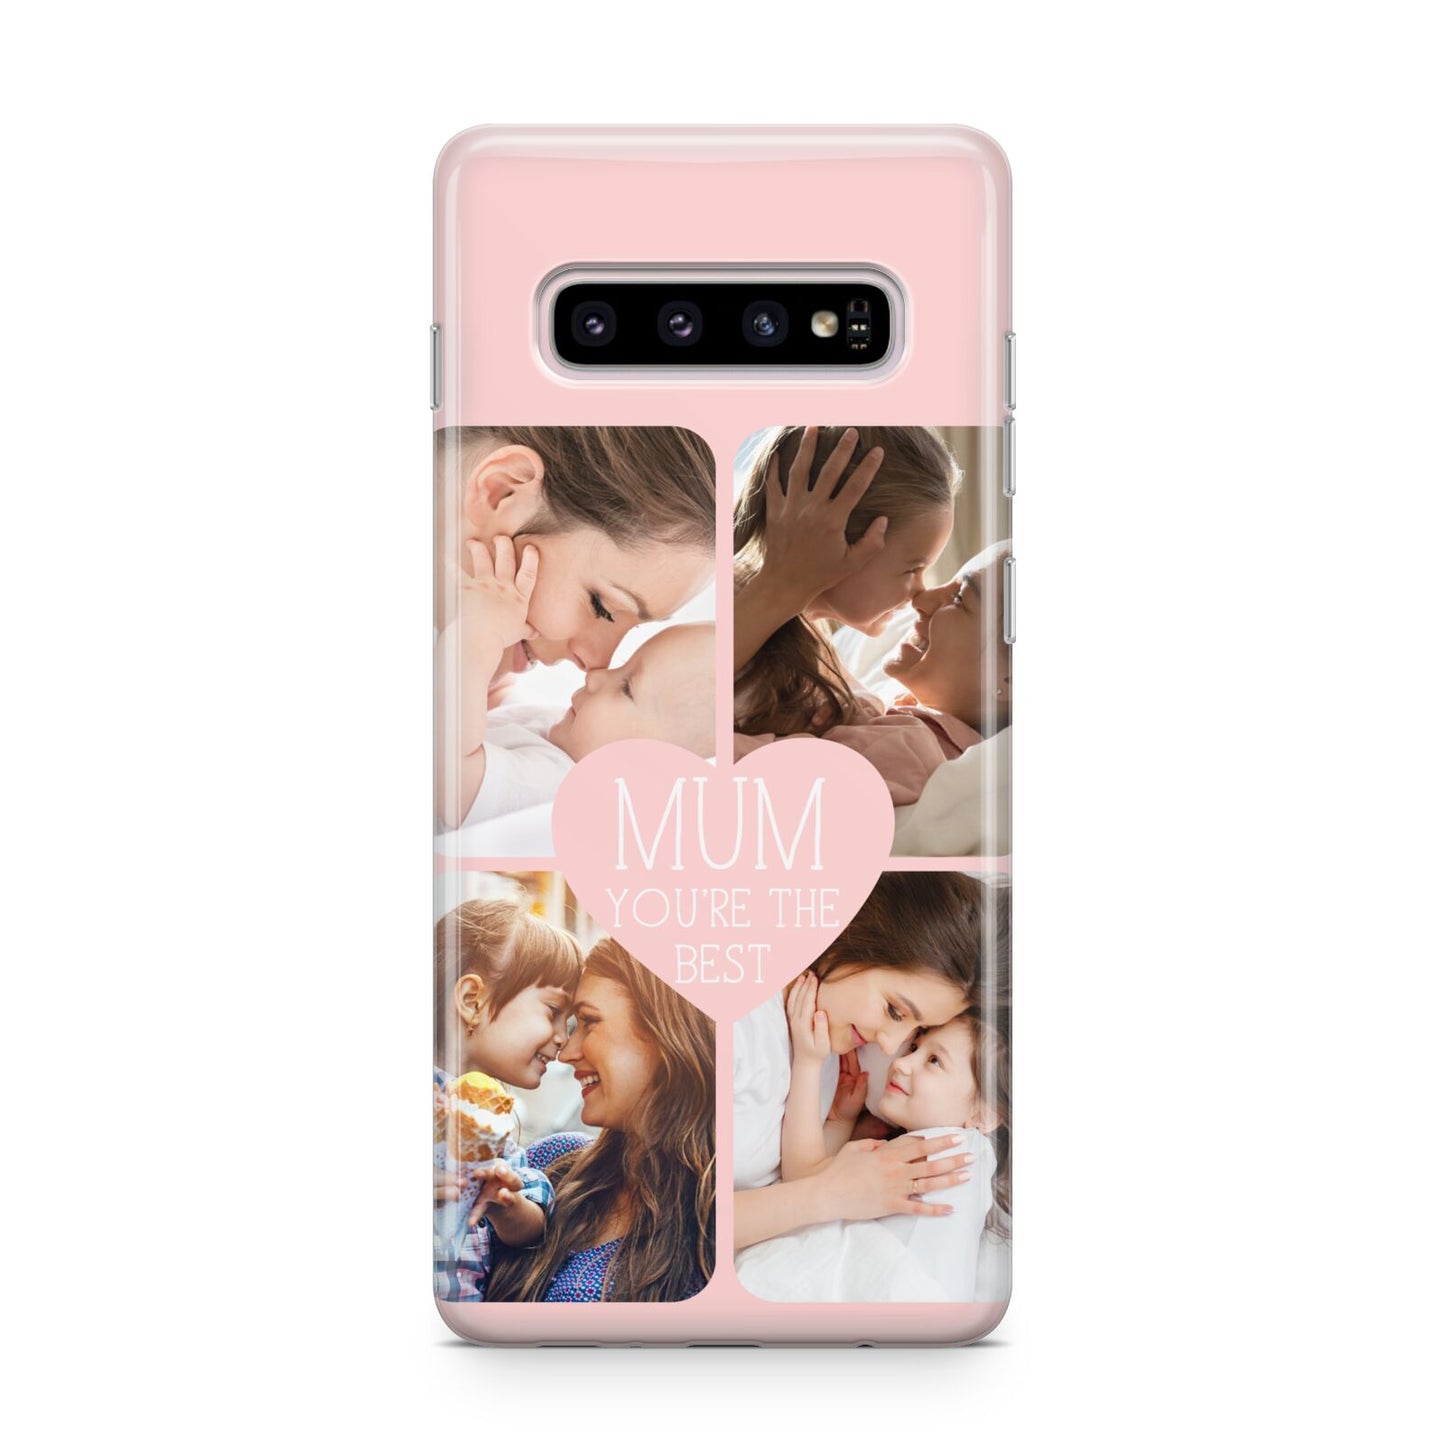 Mothers Day Four Photo Upload Samsung Galaxy S10 Plus Case